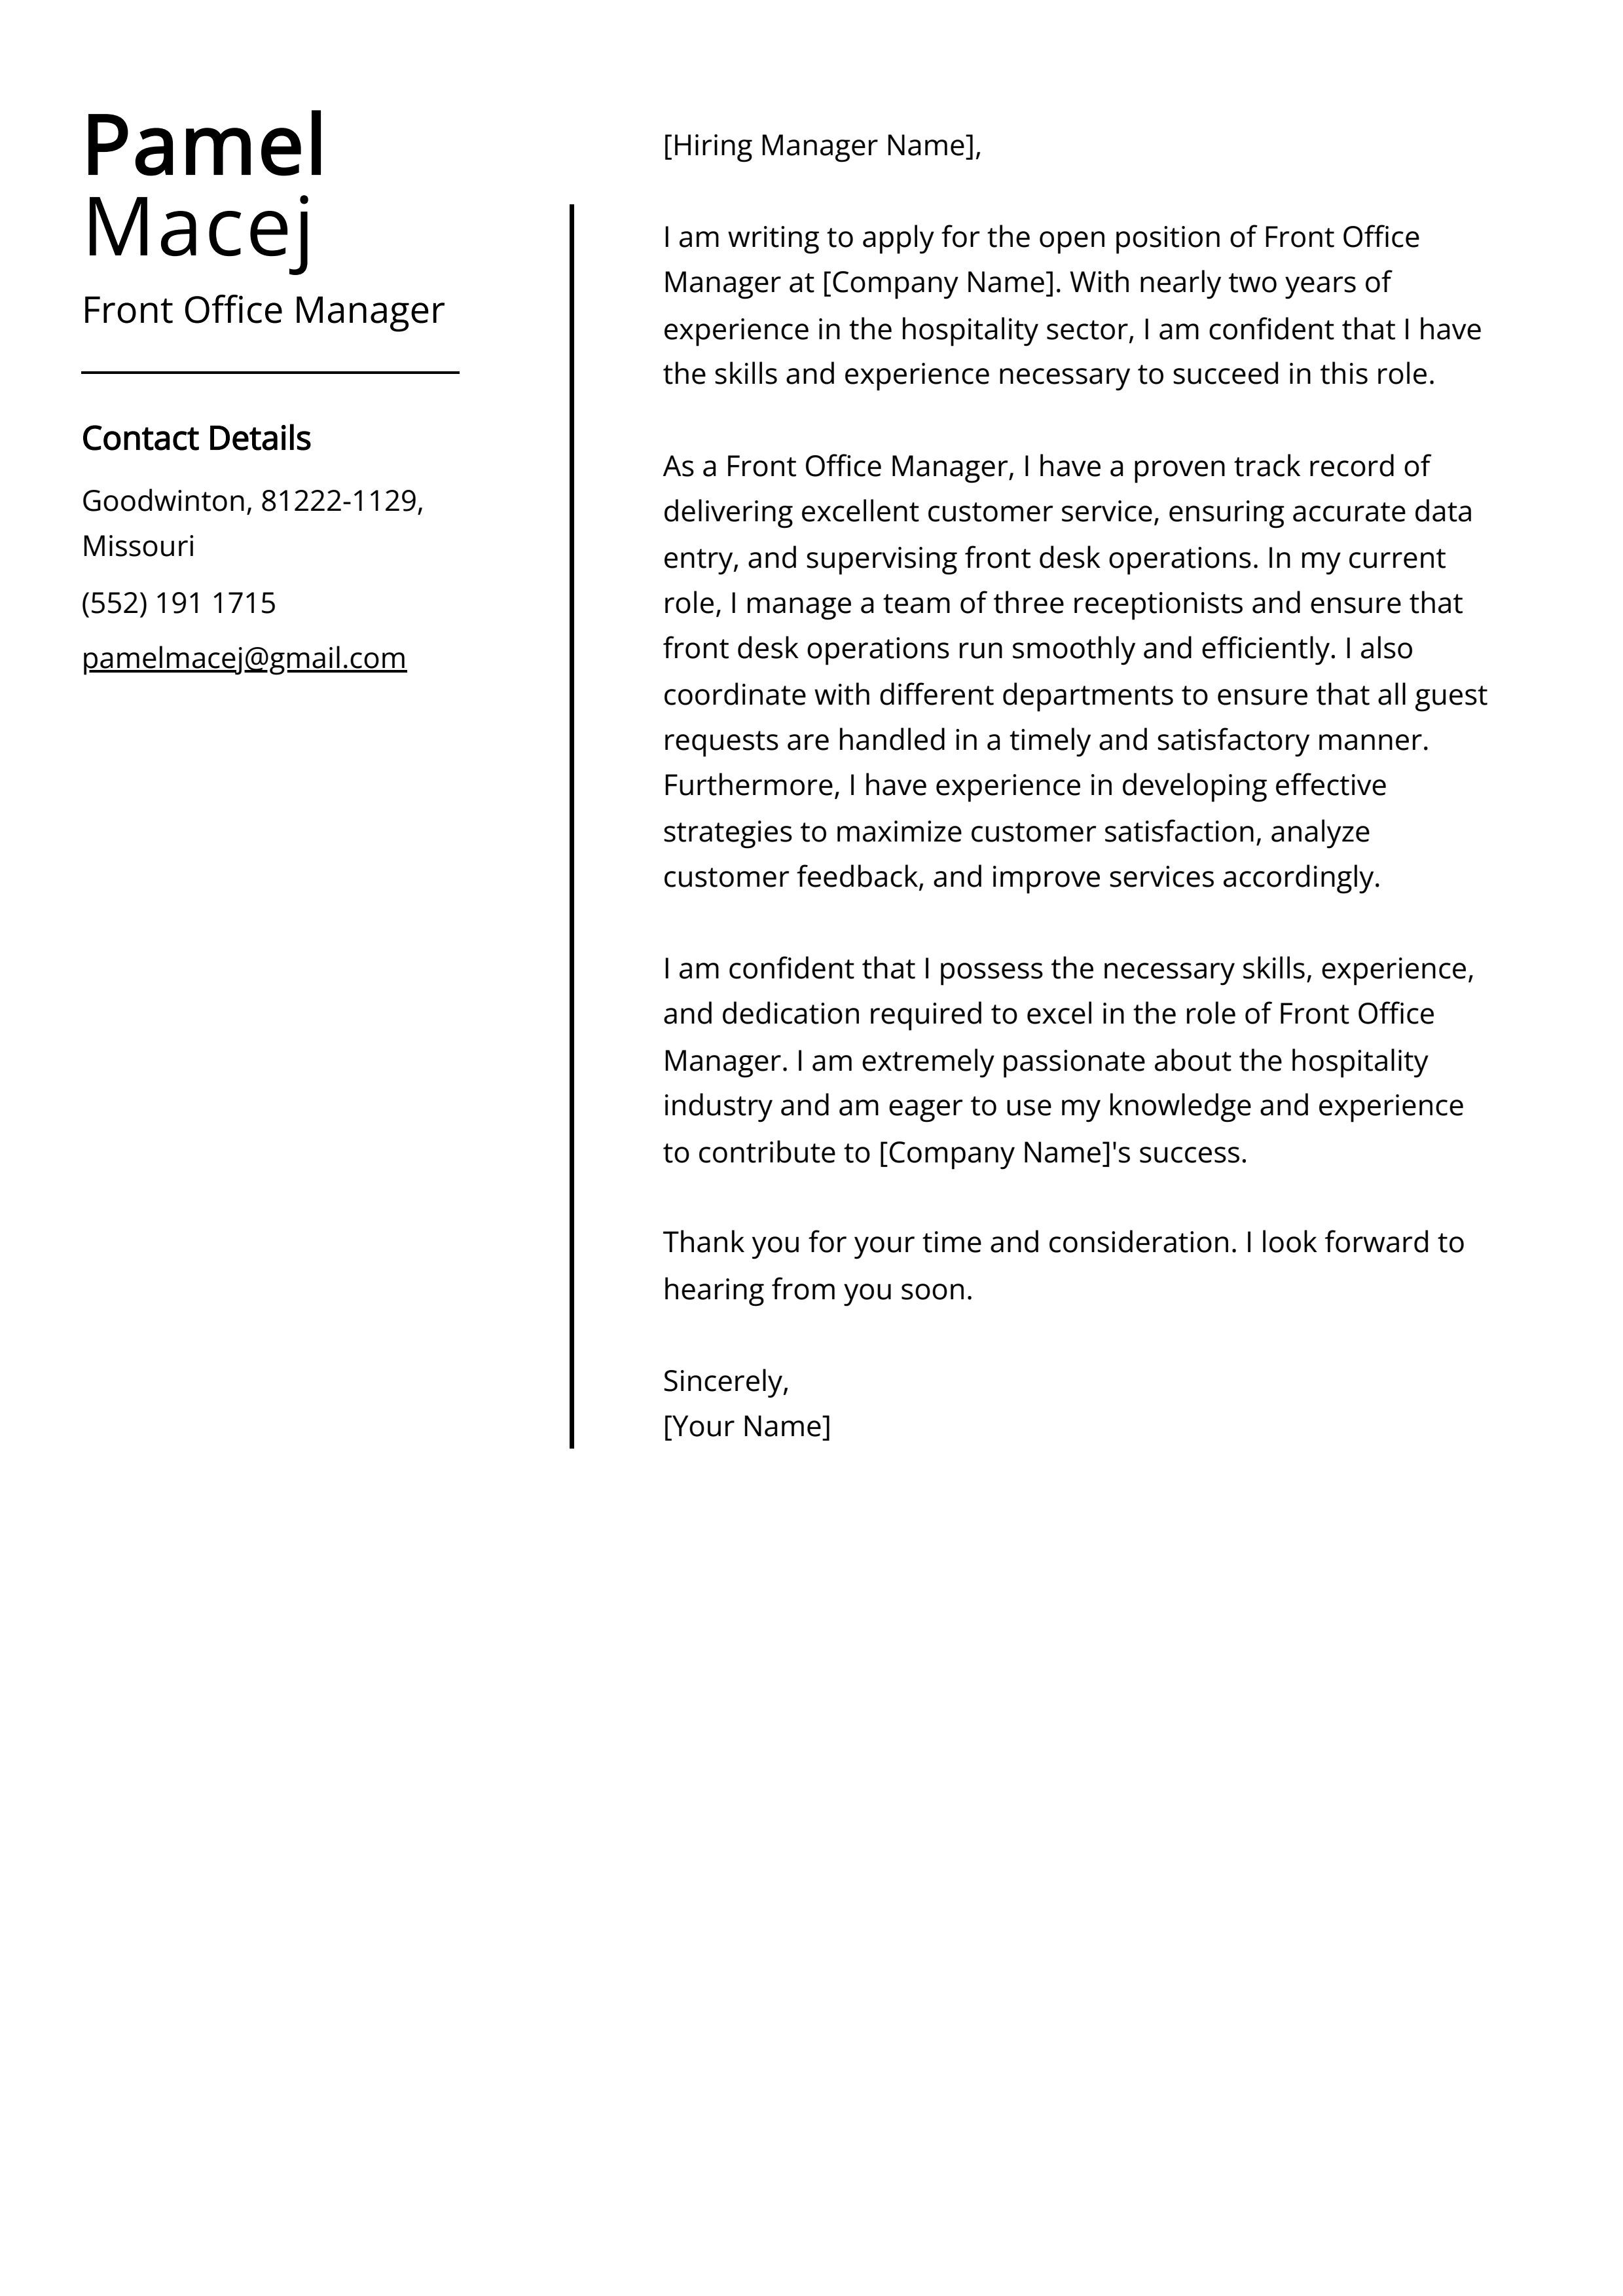 Front Office Manager Cover Letter Example